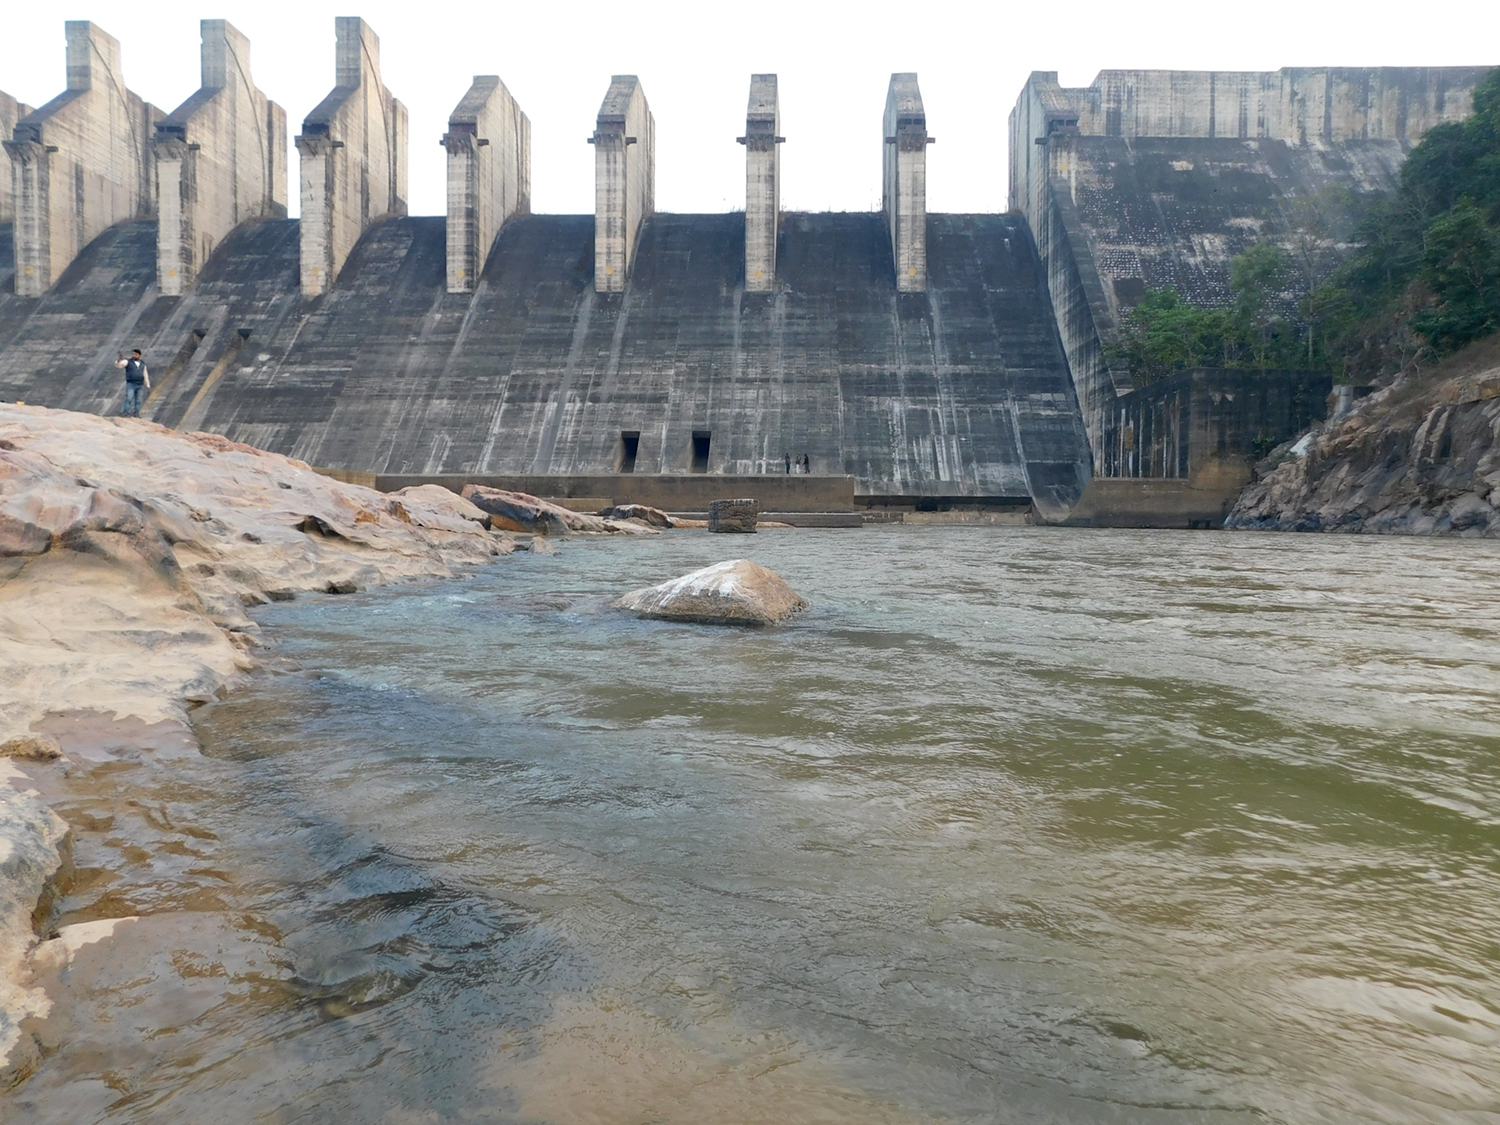 How Jharkhand’s Mandal dam could destroy the environment, livelihoods, and 3.4 lakh trees